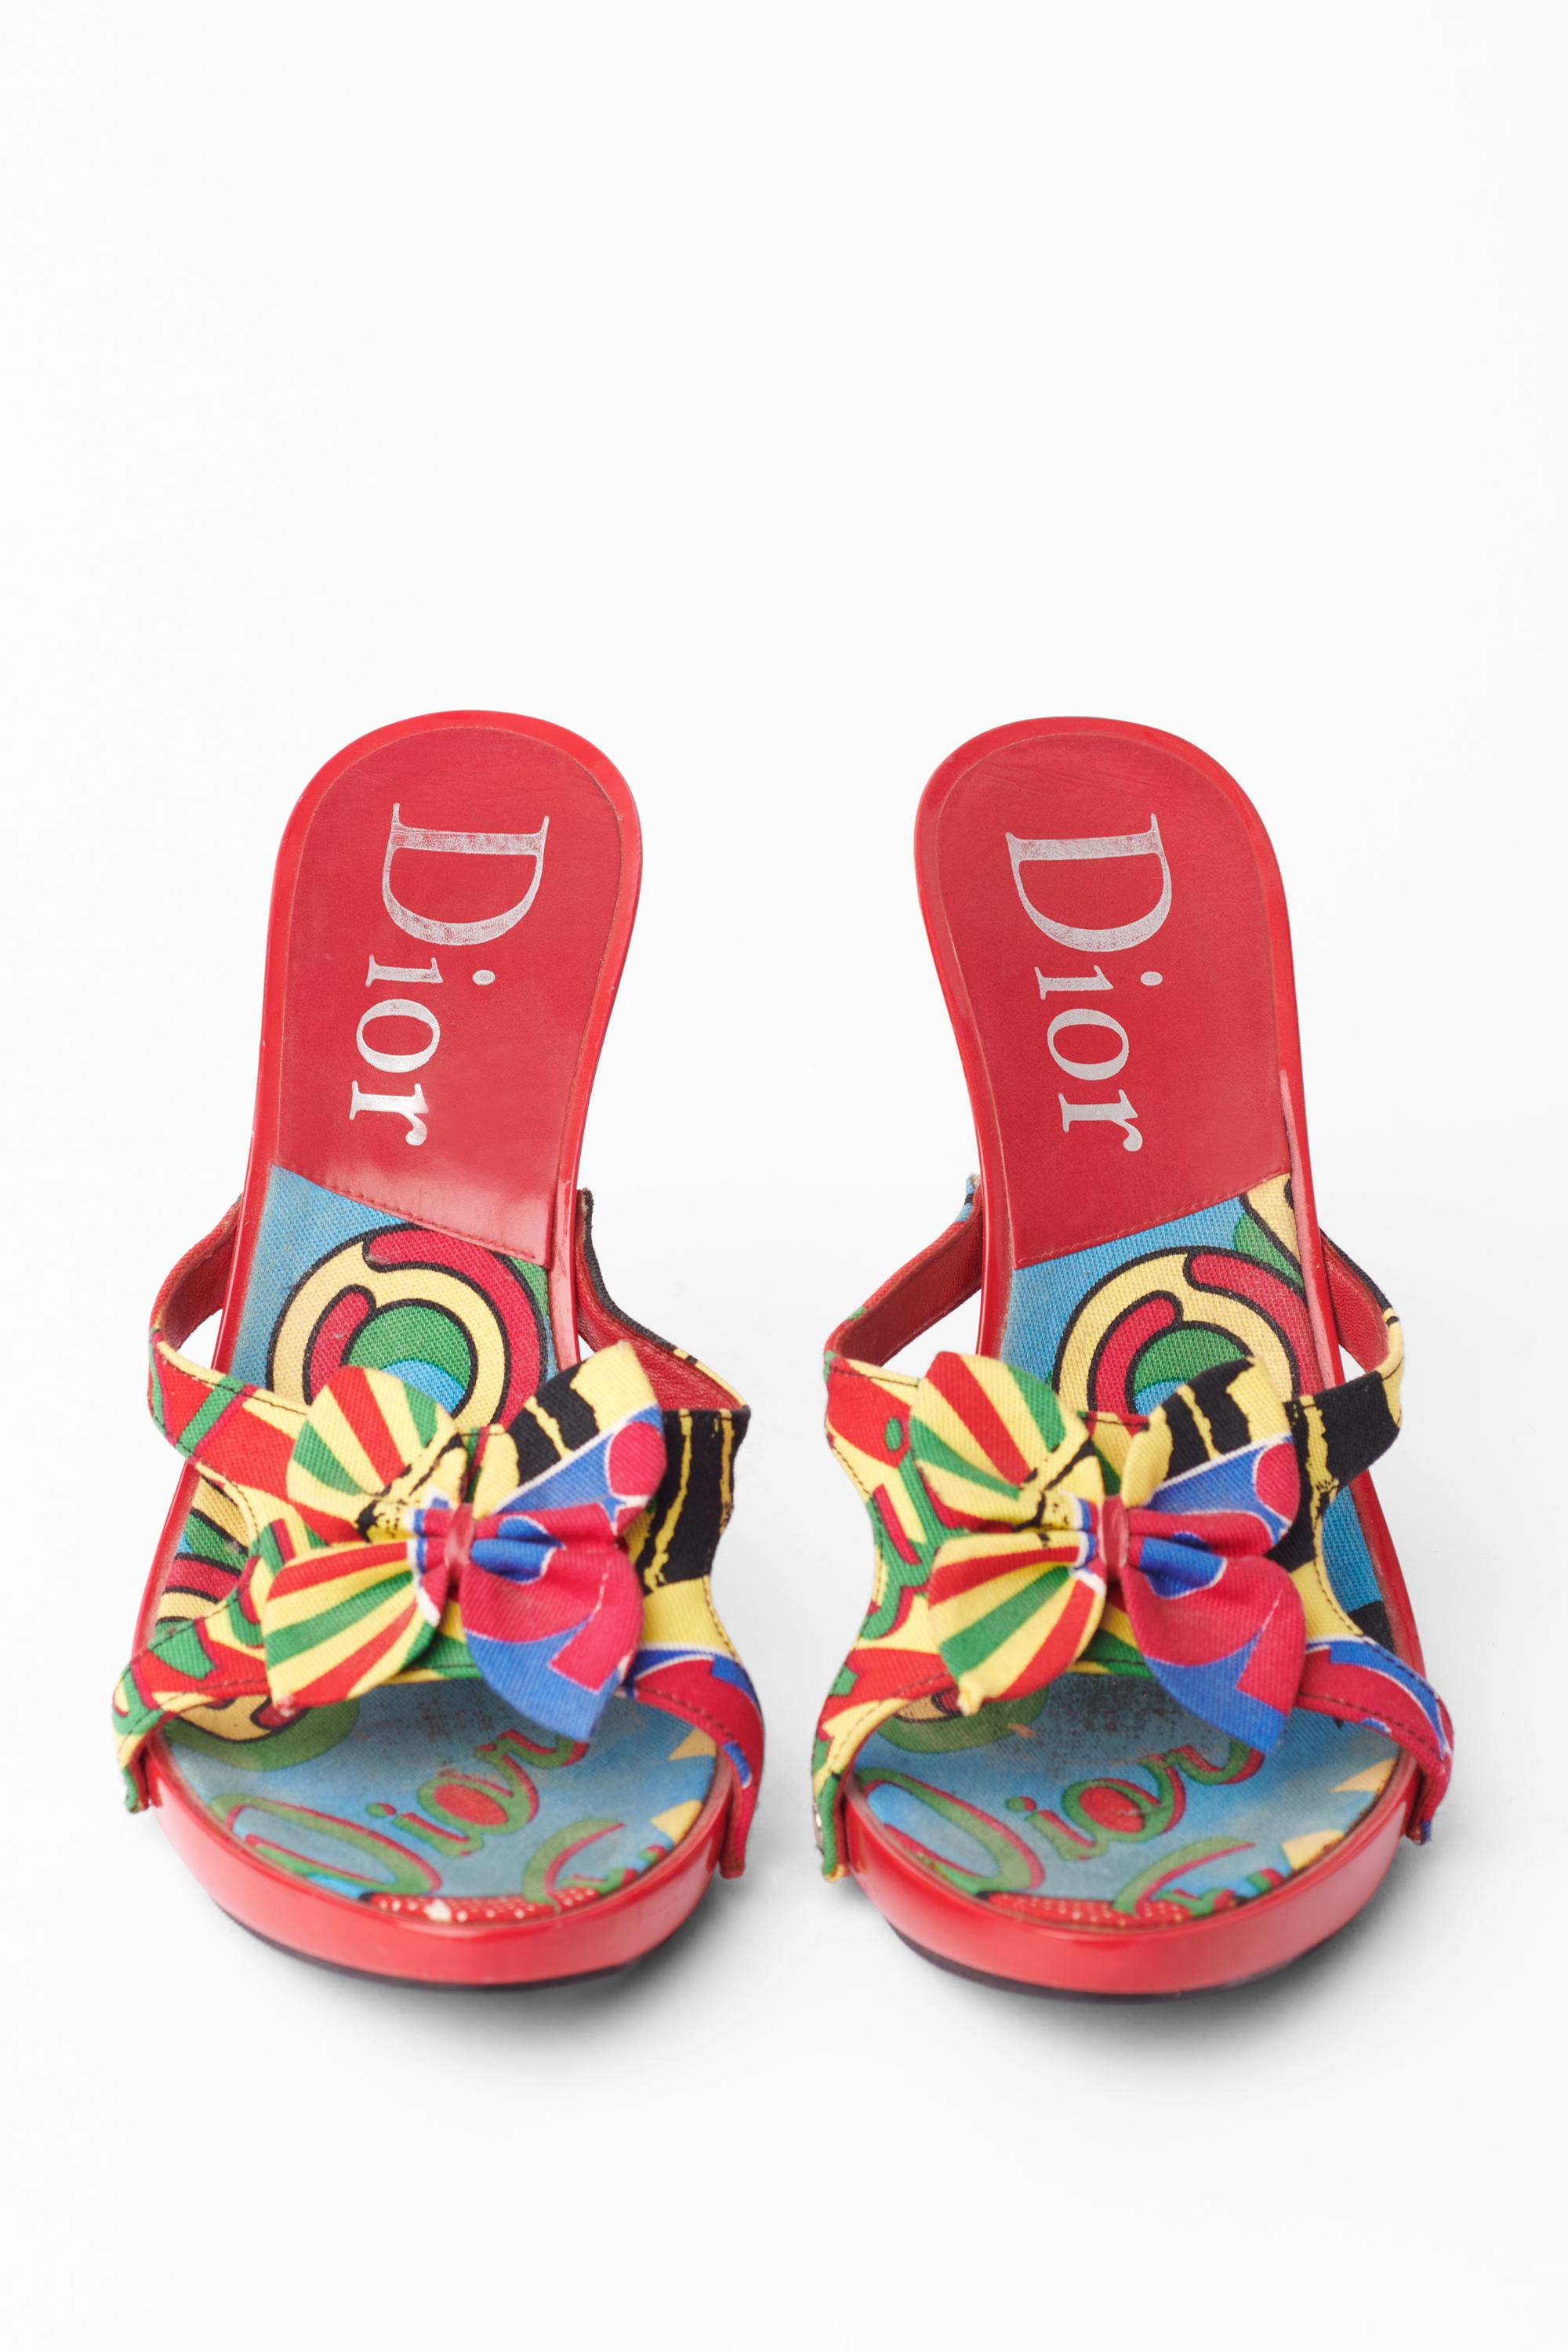 Vintage Christian Dior 2004 Rasta print heels. Features rasta pattern print all-over, butterfly bow at front, cut out front and high heel.
Brand: Christian Dior
Color: Multi
Size: UK 4
Brand: Christian Dior
Tag Size: 37
Modern Size: UK: 4, US: 6,